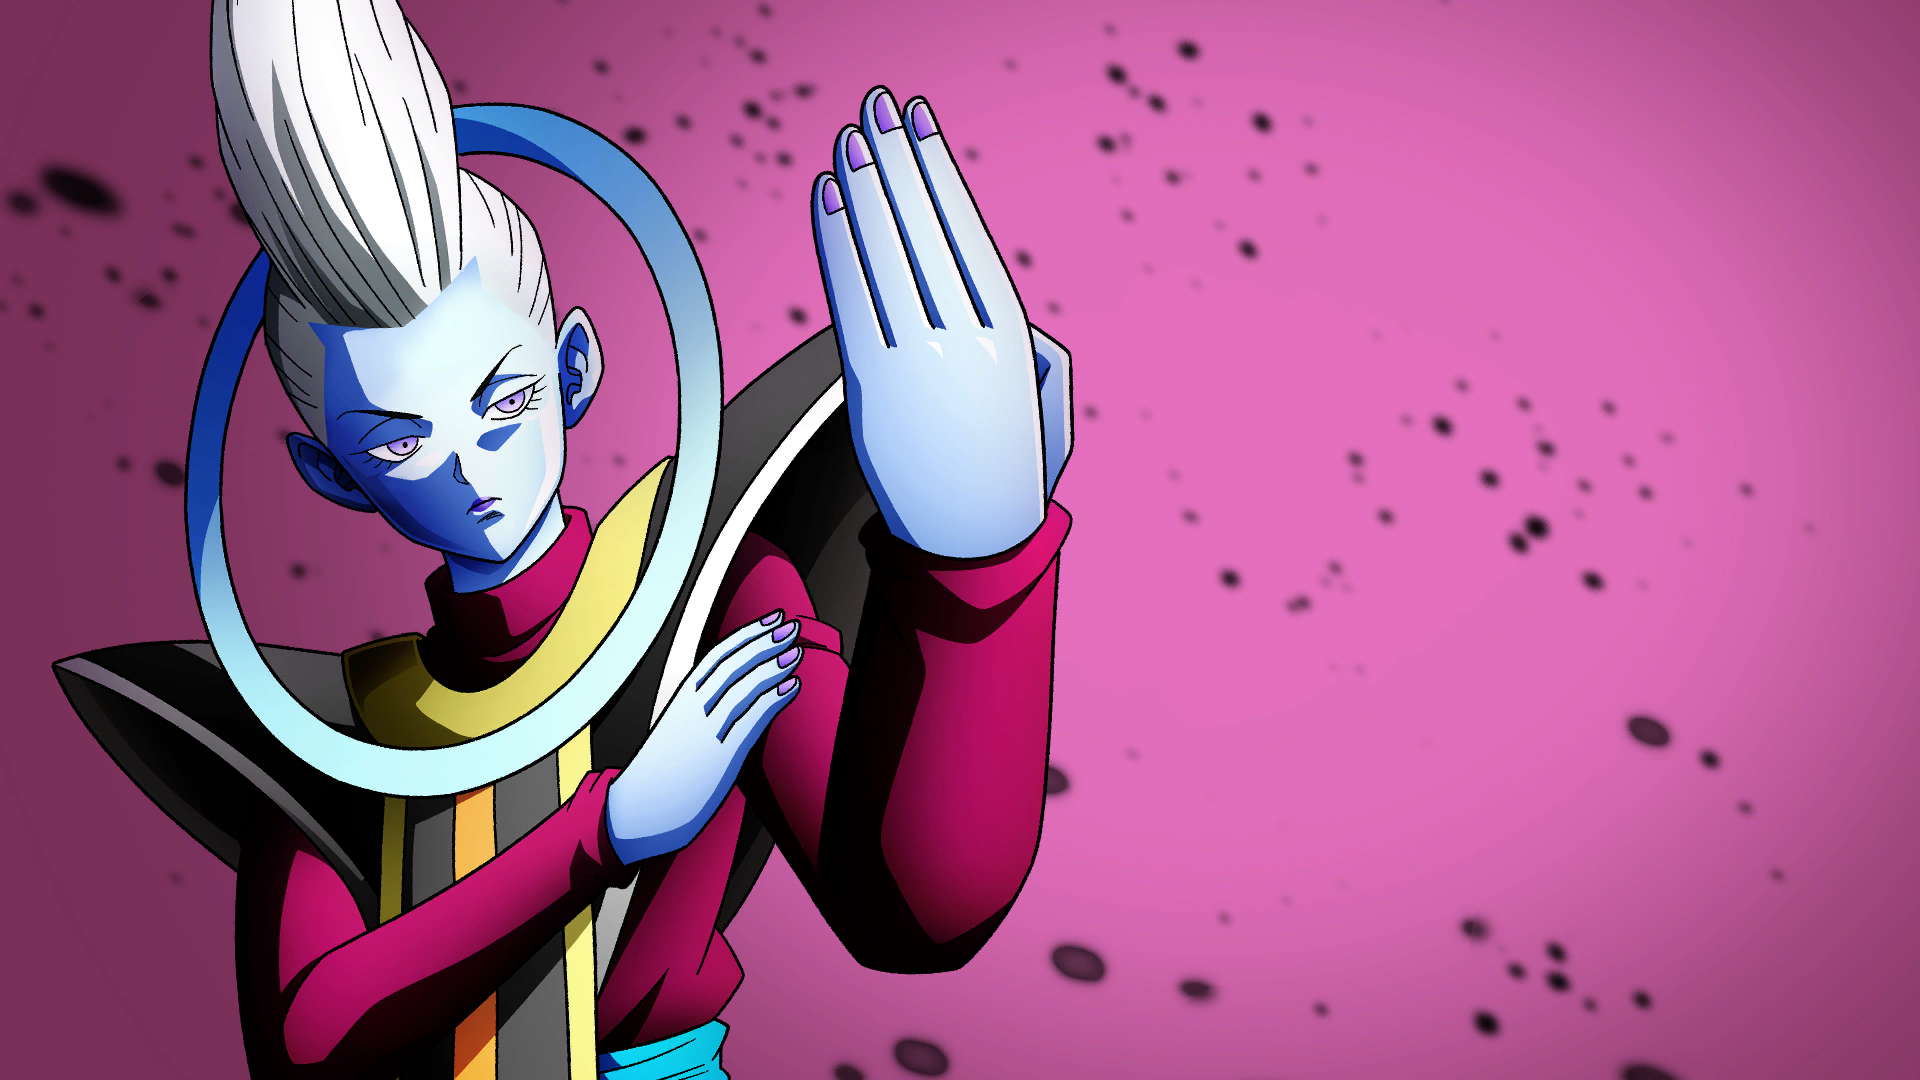 Whis Wallpapers